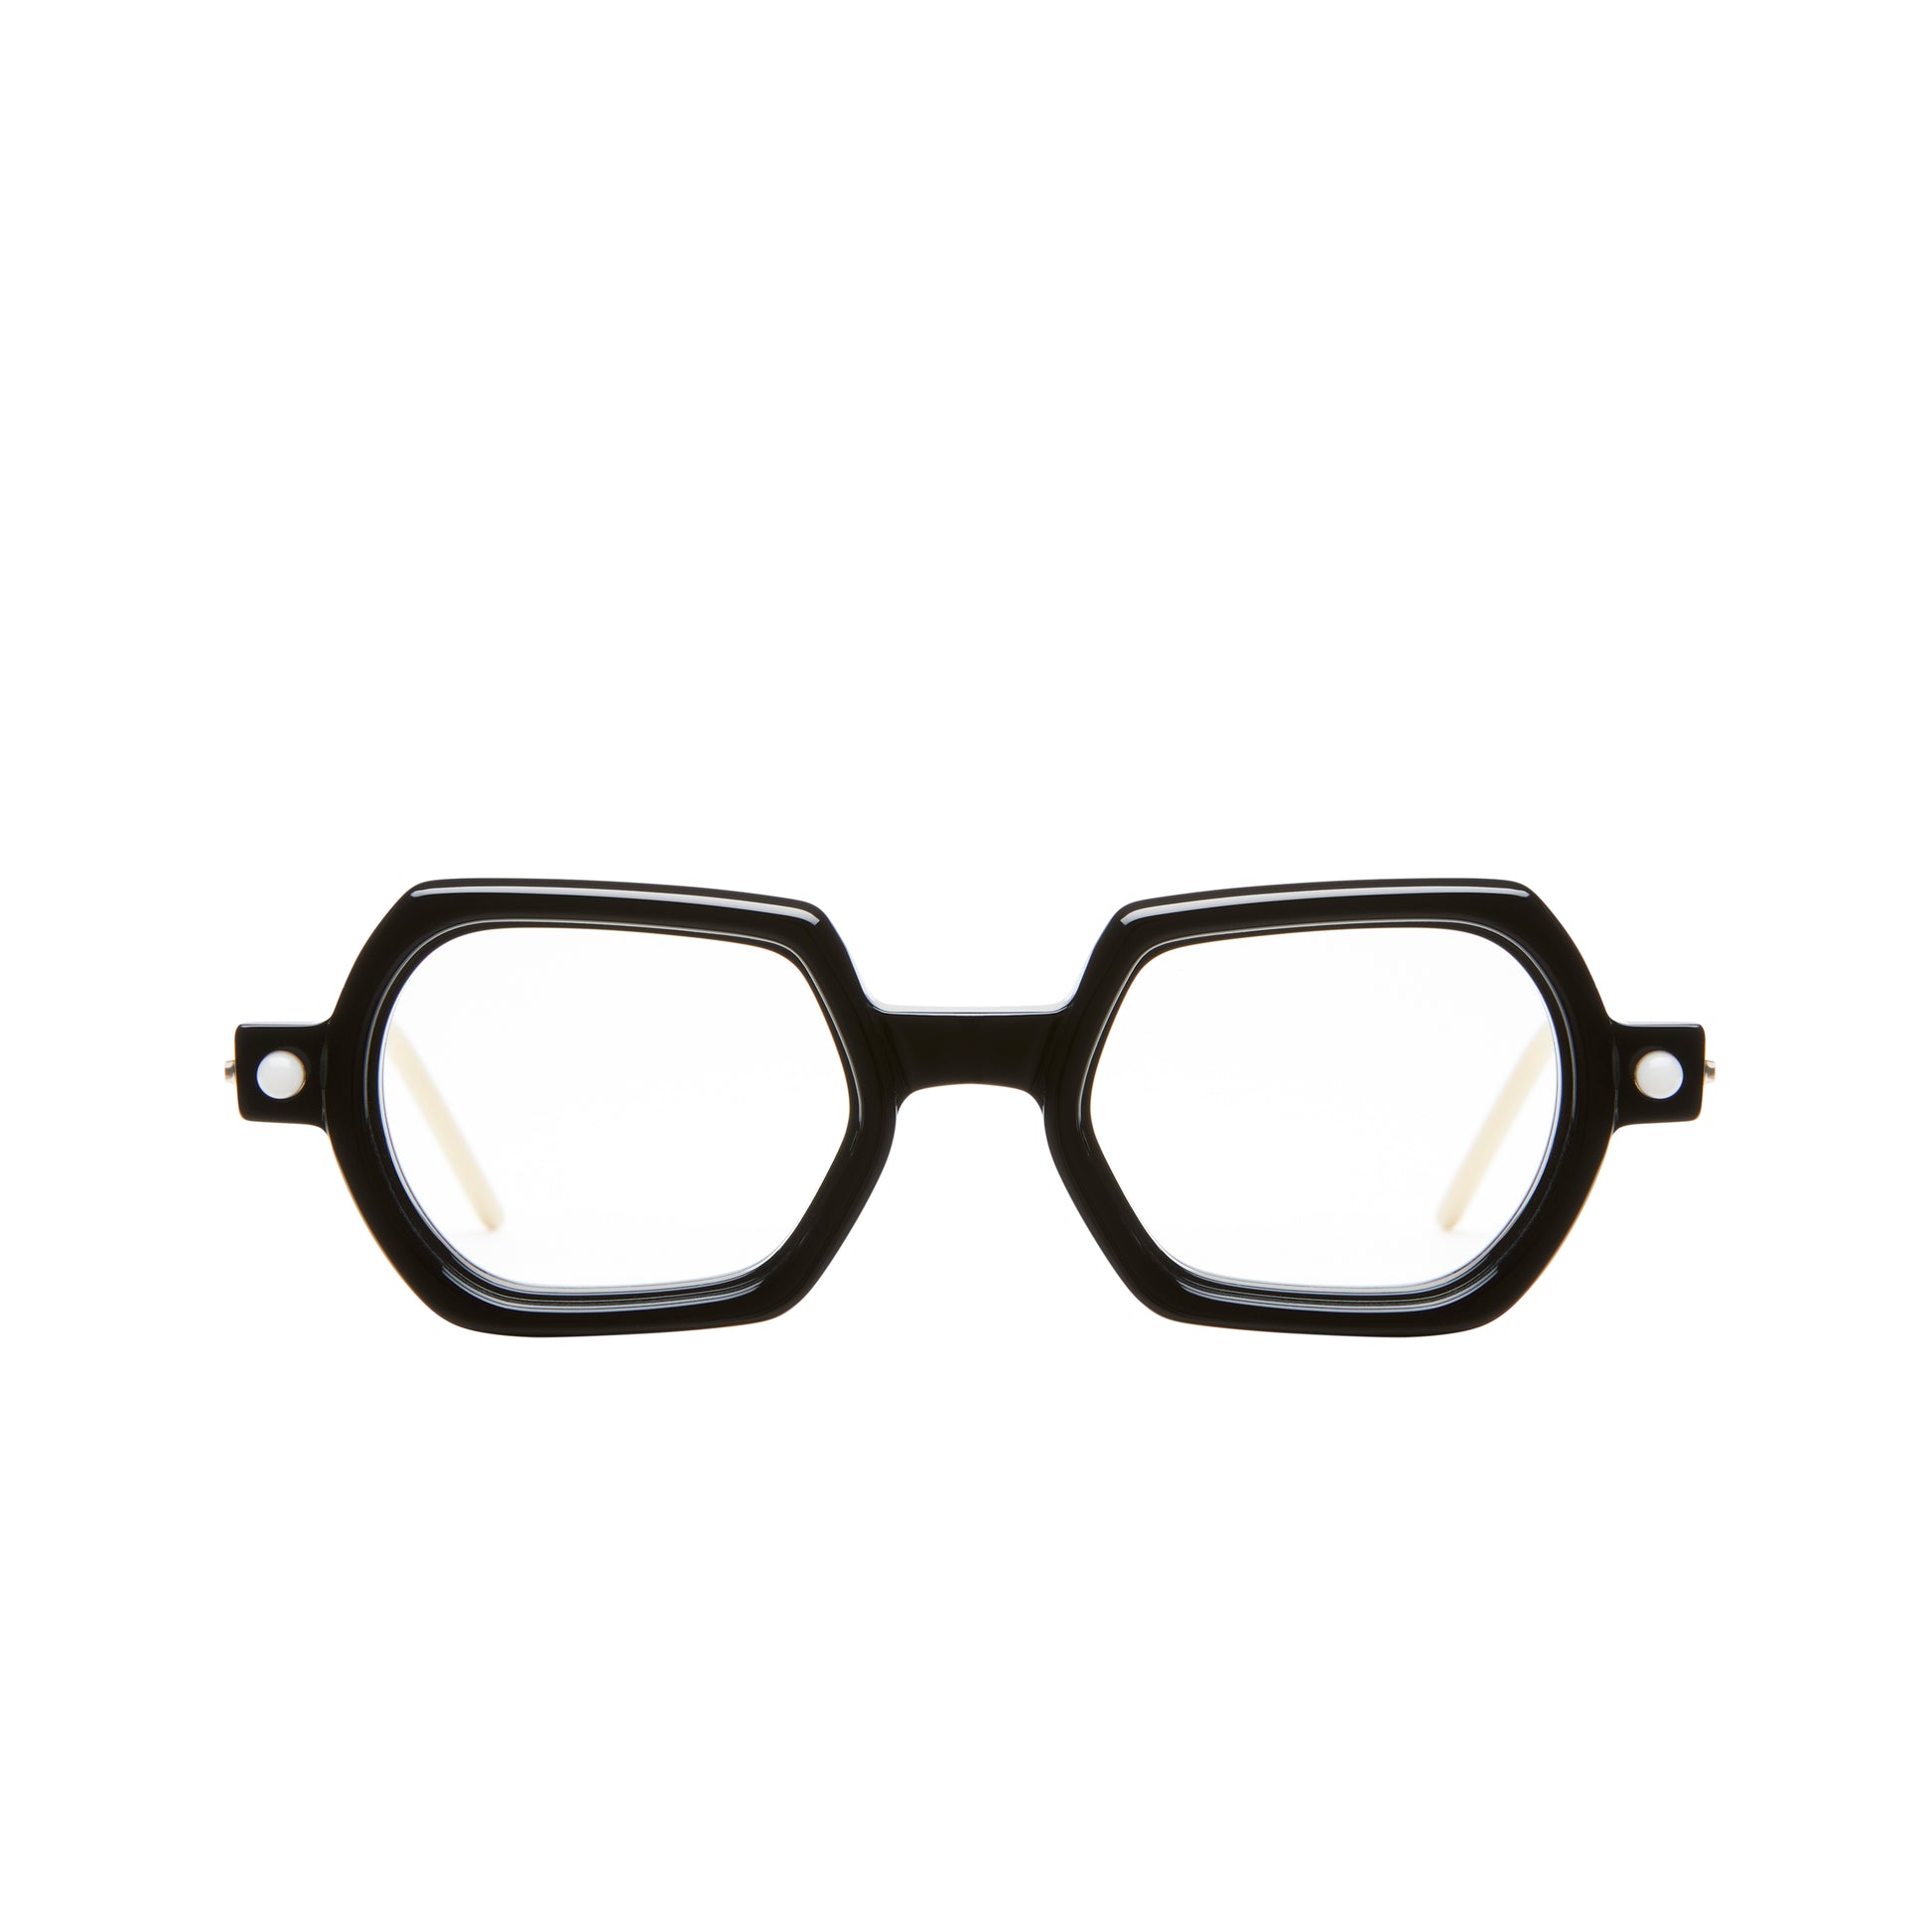 <p> Kuboraum MASKE P3 is a  Black, Beige; Acetate Optical Frame with a Avant Garde shape.  </p><p>Shop with confidence from Adair Eyewear, a Kuboraum Authorized Dealer.  We have provided the best in customer service and great designer eyewear for over 40 years. Visit https://adaireyewearonline.com</p>